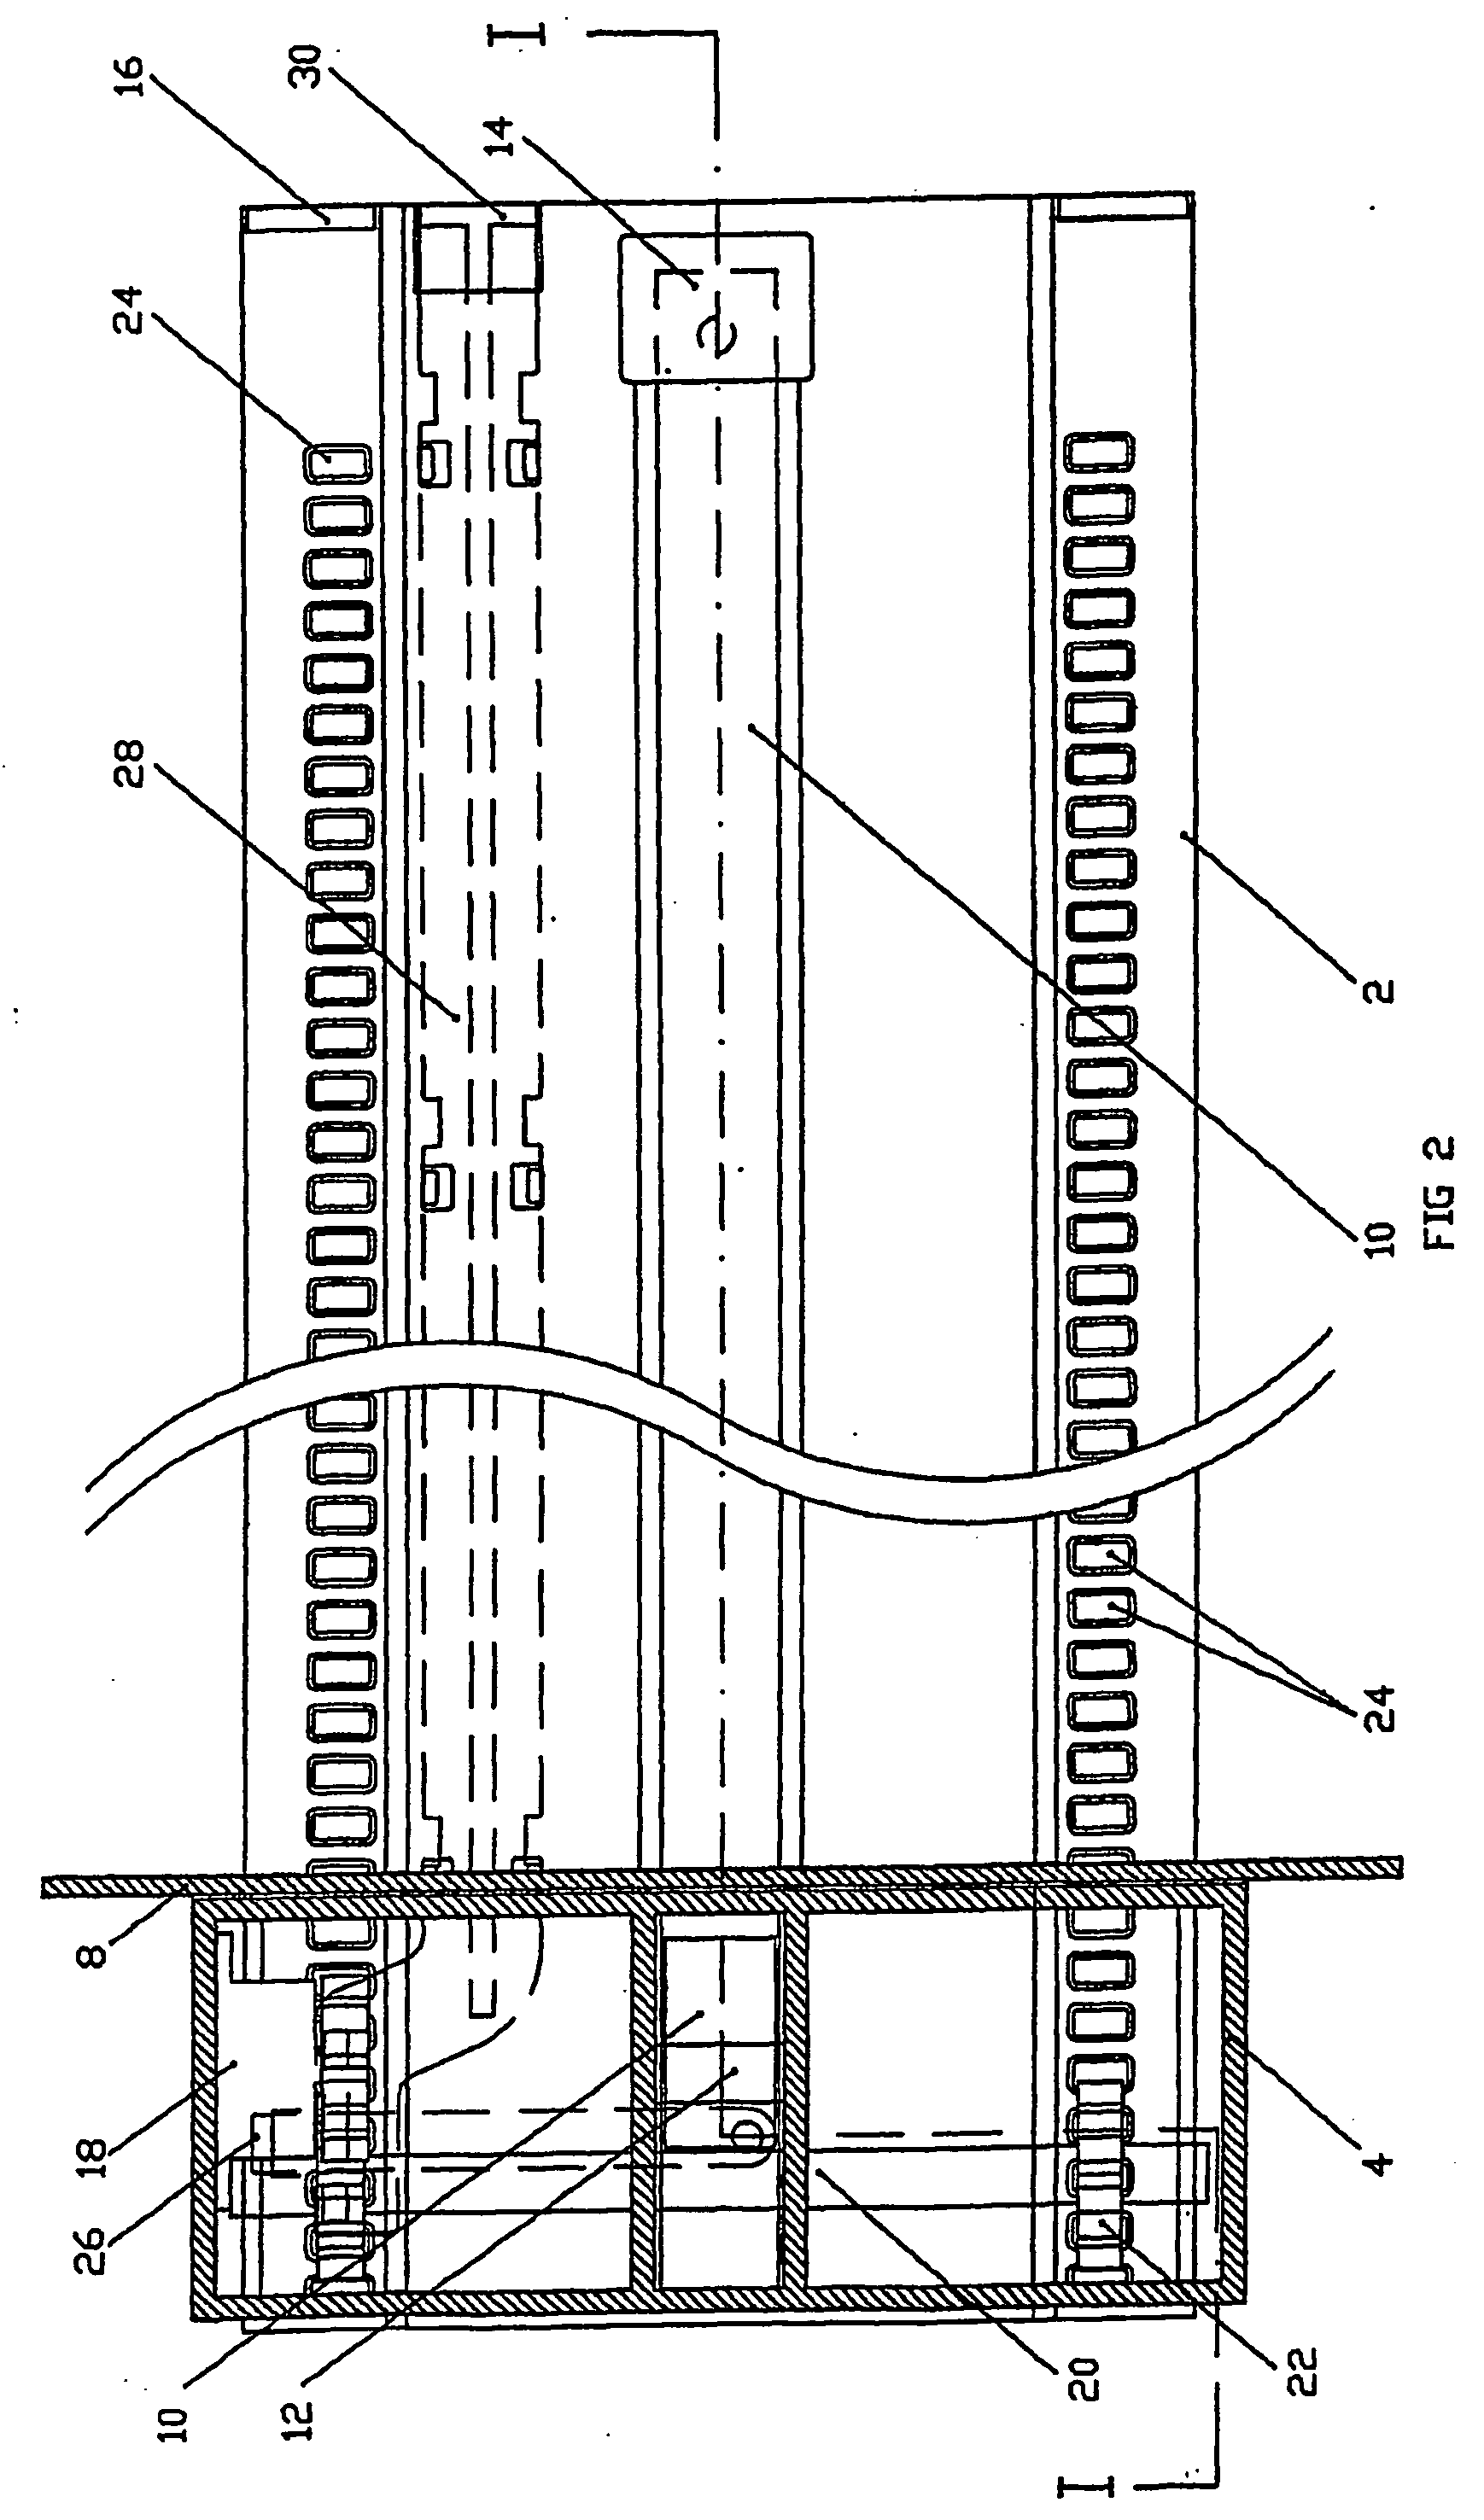 Pusher apparatus for merchandise